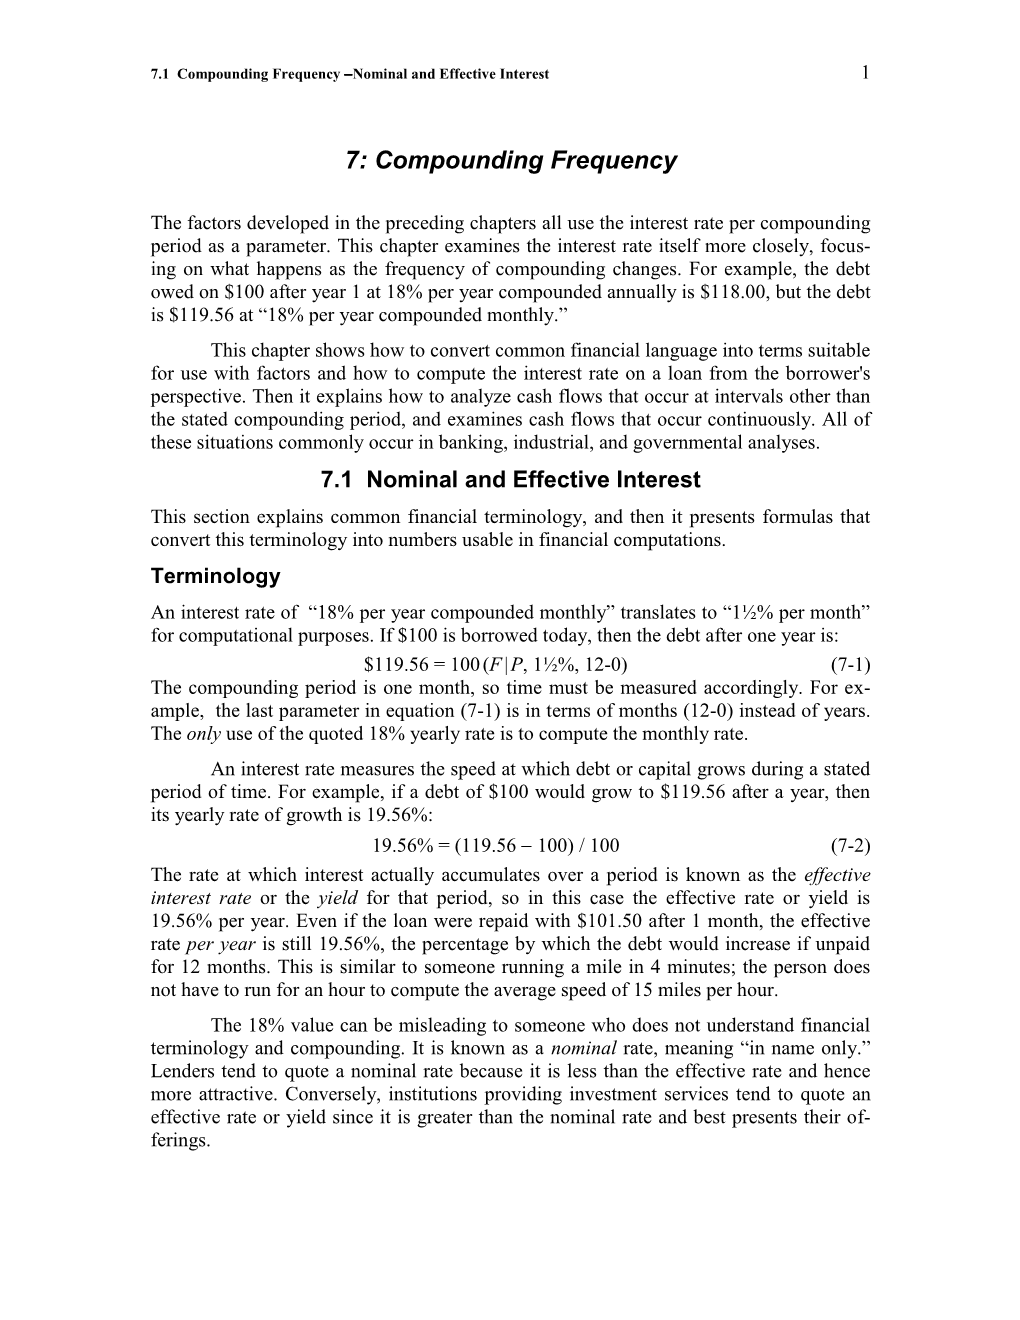 7: Compounding Frequency